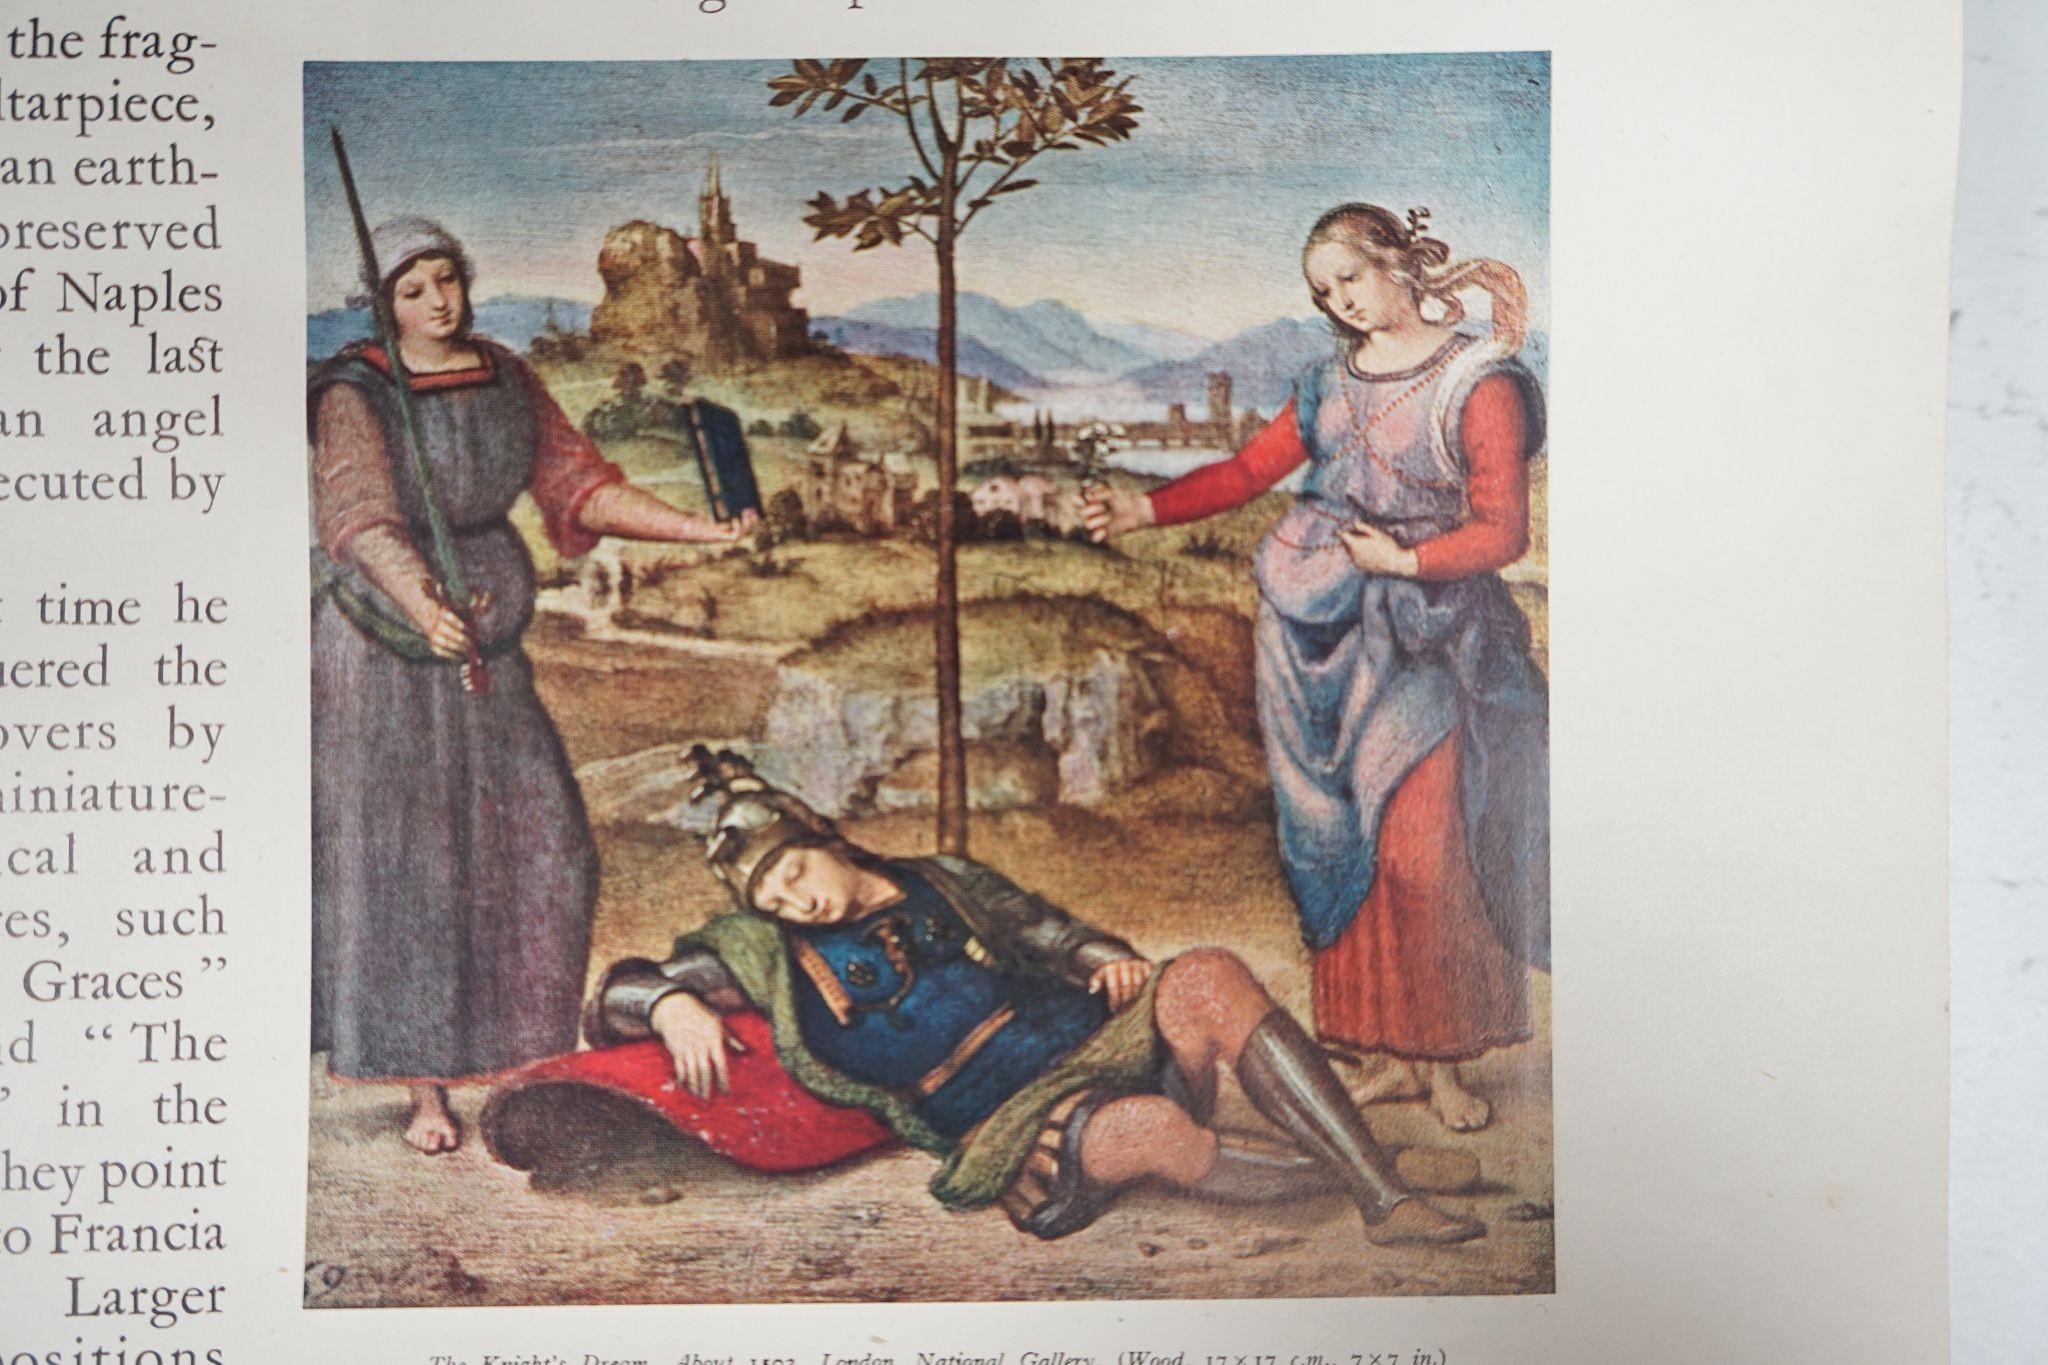 The Paintings of Raphael, Phaidon Edition and a folio of 28 Masaccio colour plates